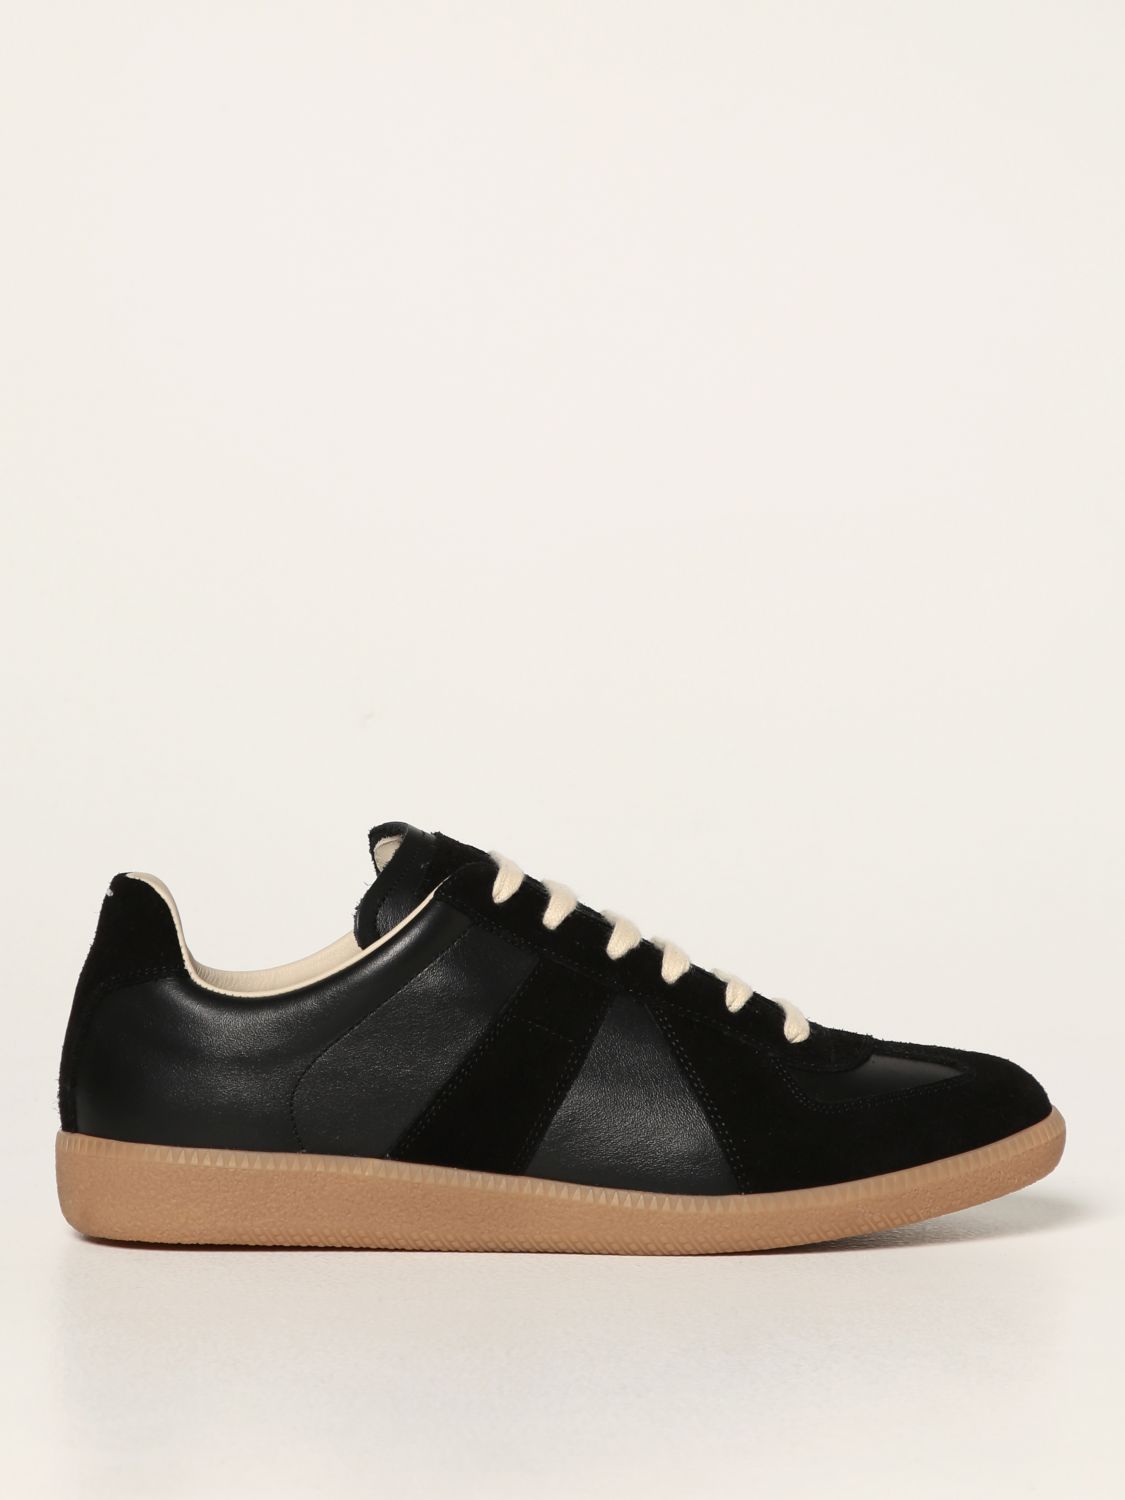 MAISON MARGIELA: sneakers in leather and suede | Sneakers Maison Margiela Men Black 1 | Maison Margiela S57WS0236P1895 GIGLIO.COM